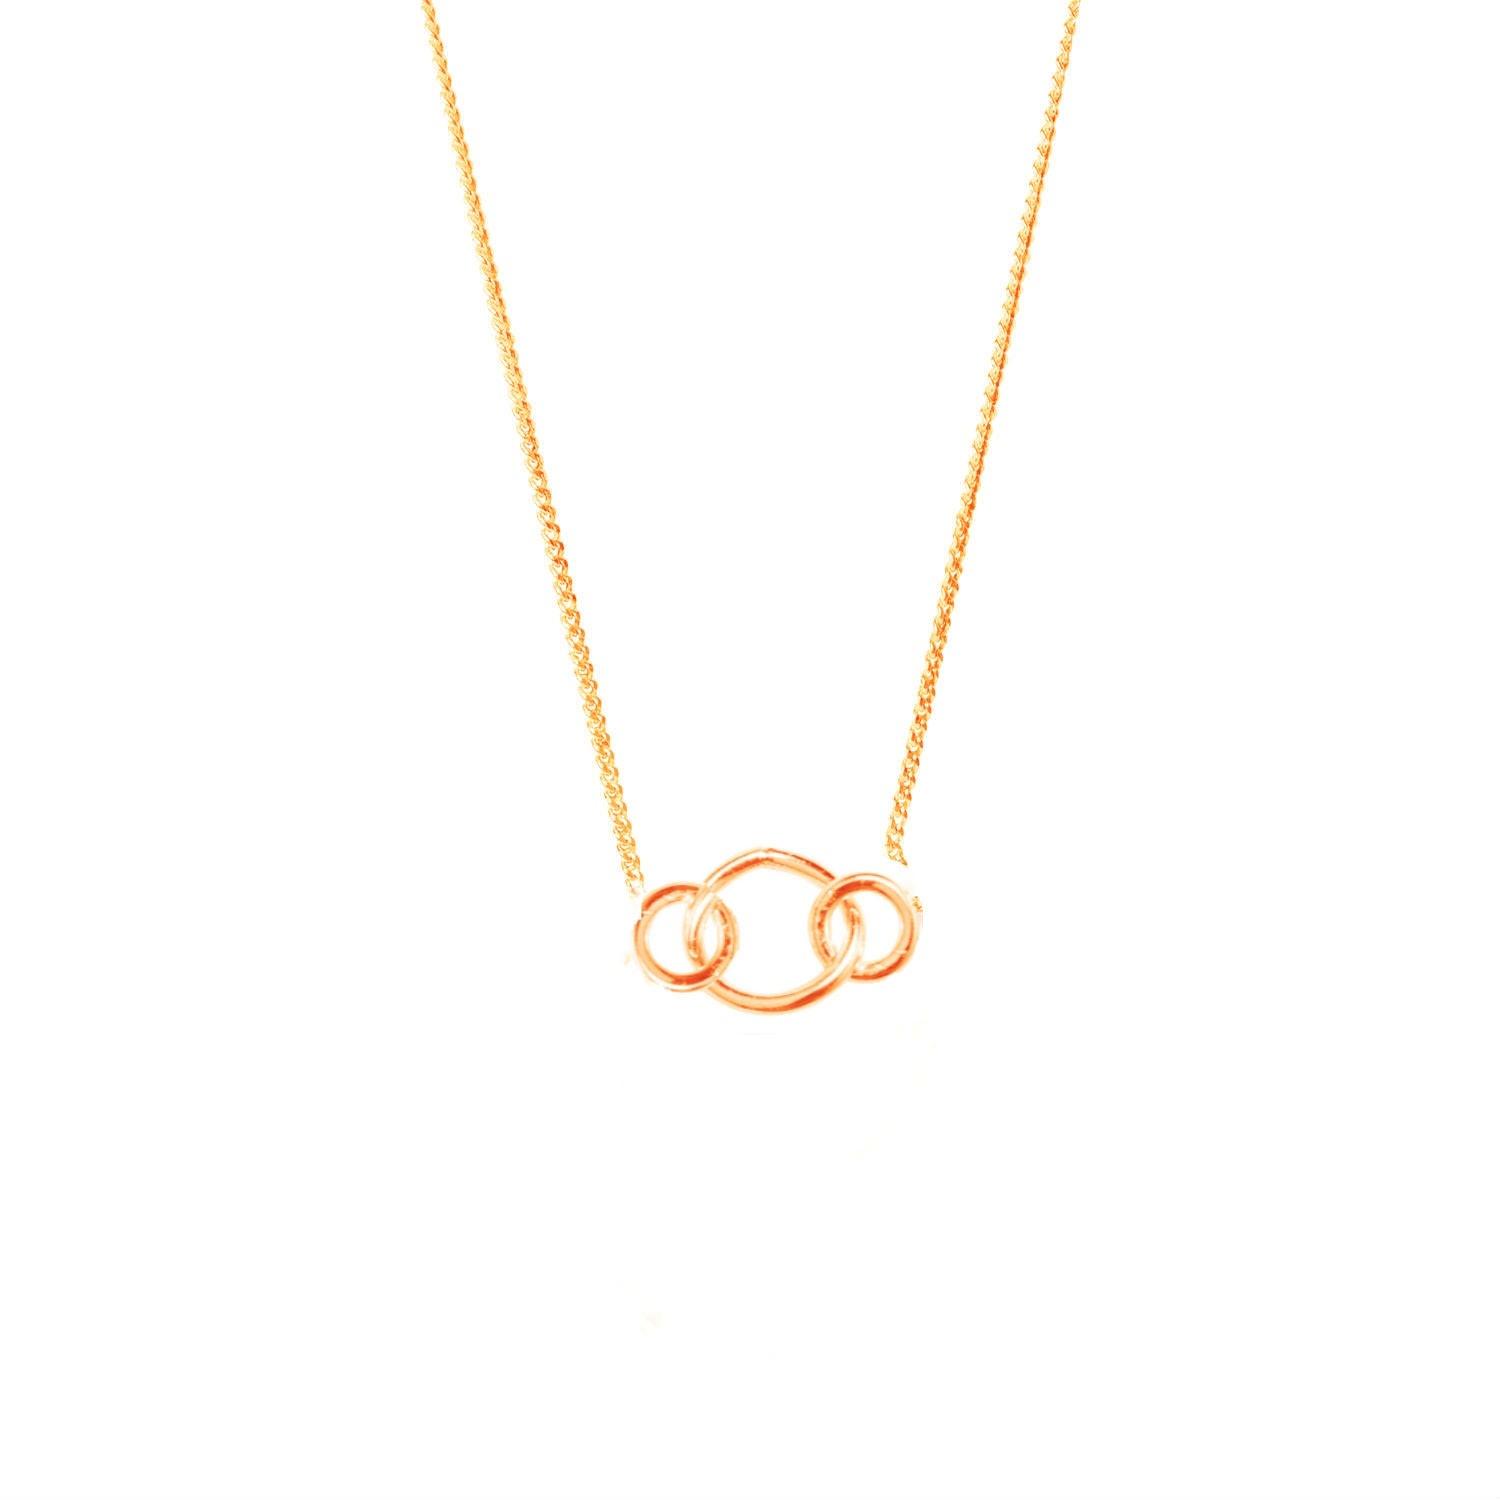 Lily Flo Jewellery Solid Rose Gold Circle Fortune Necklace in Metallic ...